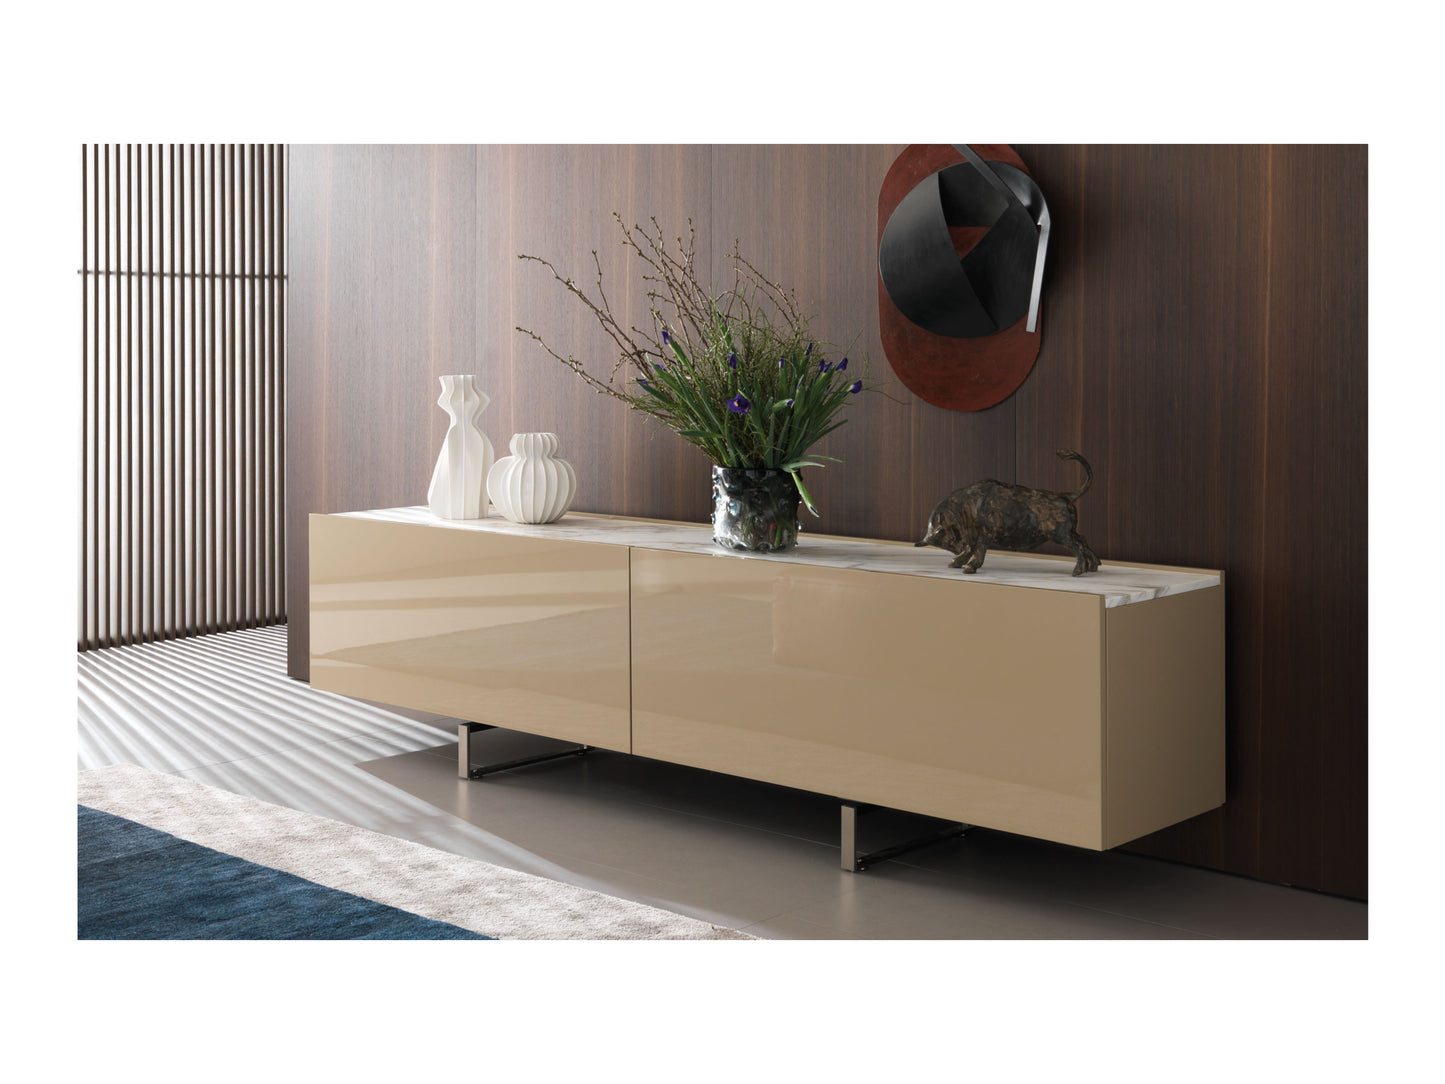 SQUARE | Sideboard with sliding doors by MisuraEmme